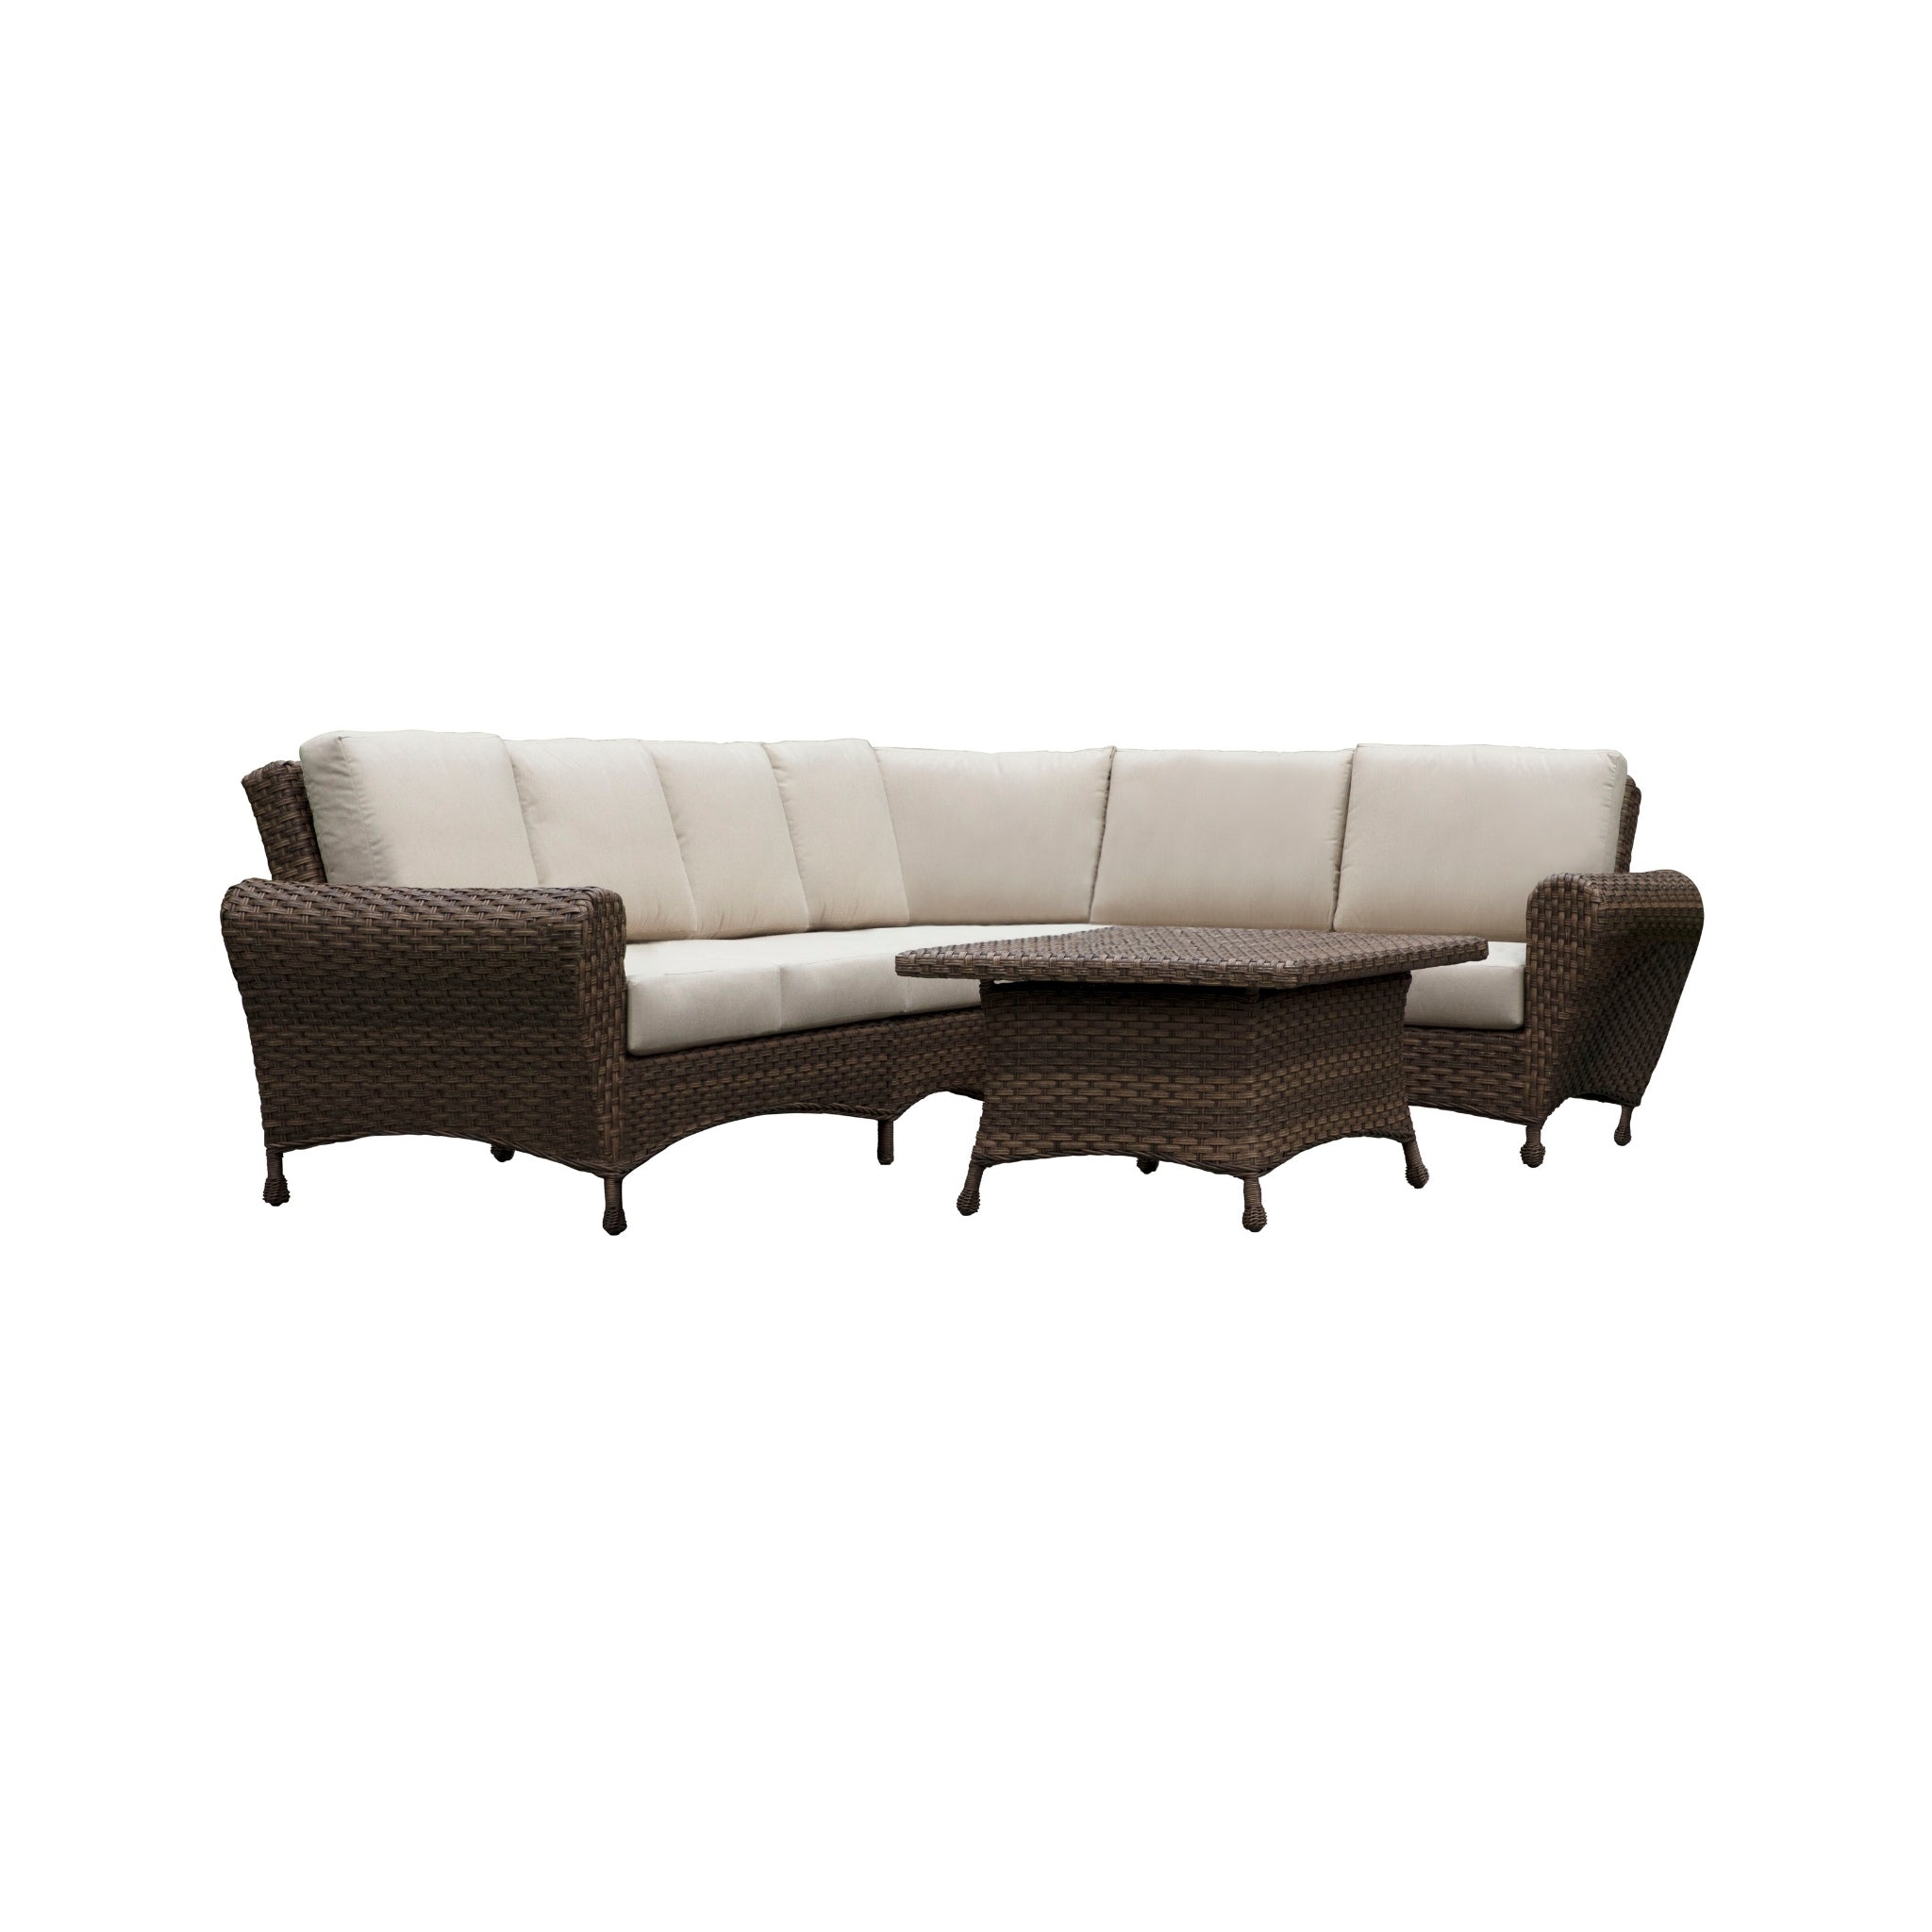 Charlbury 5pc Outdoor Seating Sectional